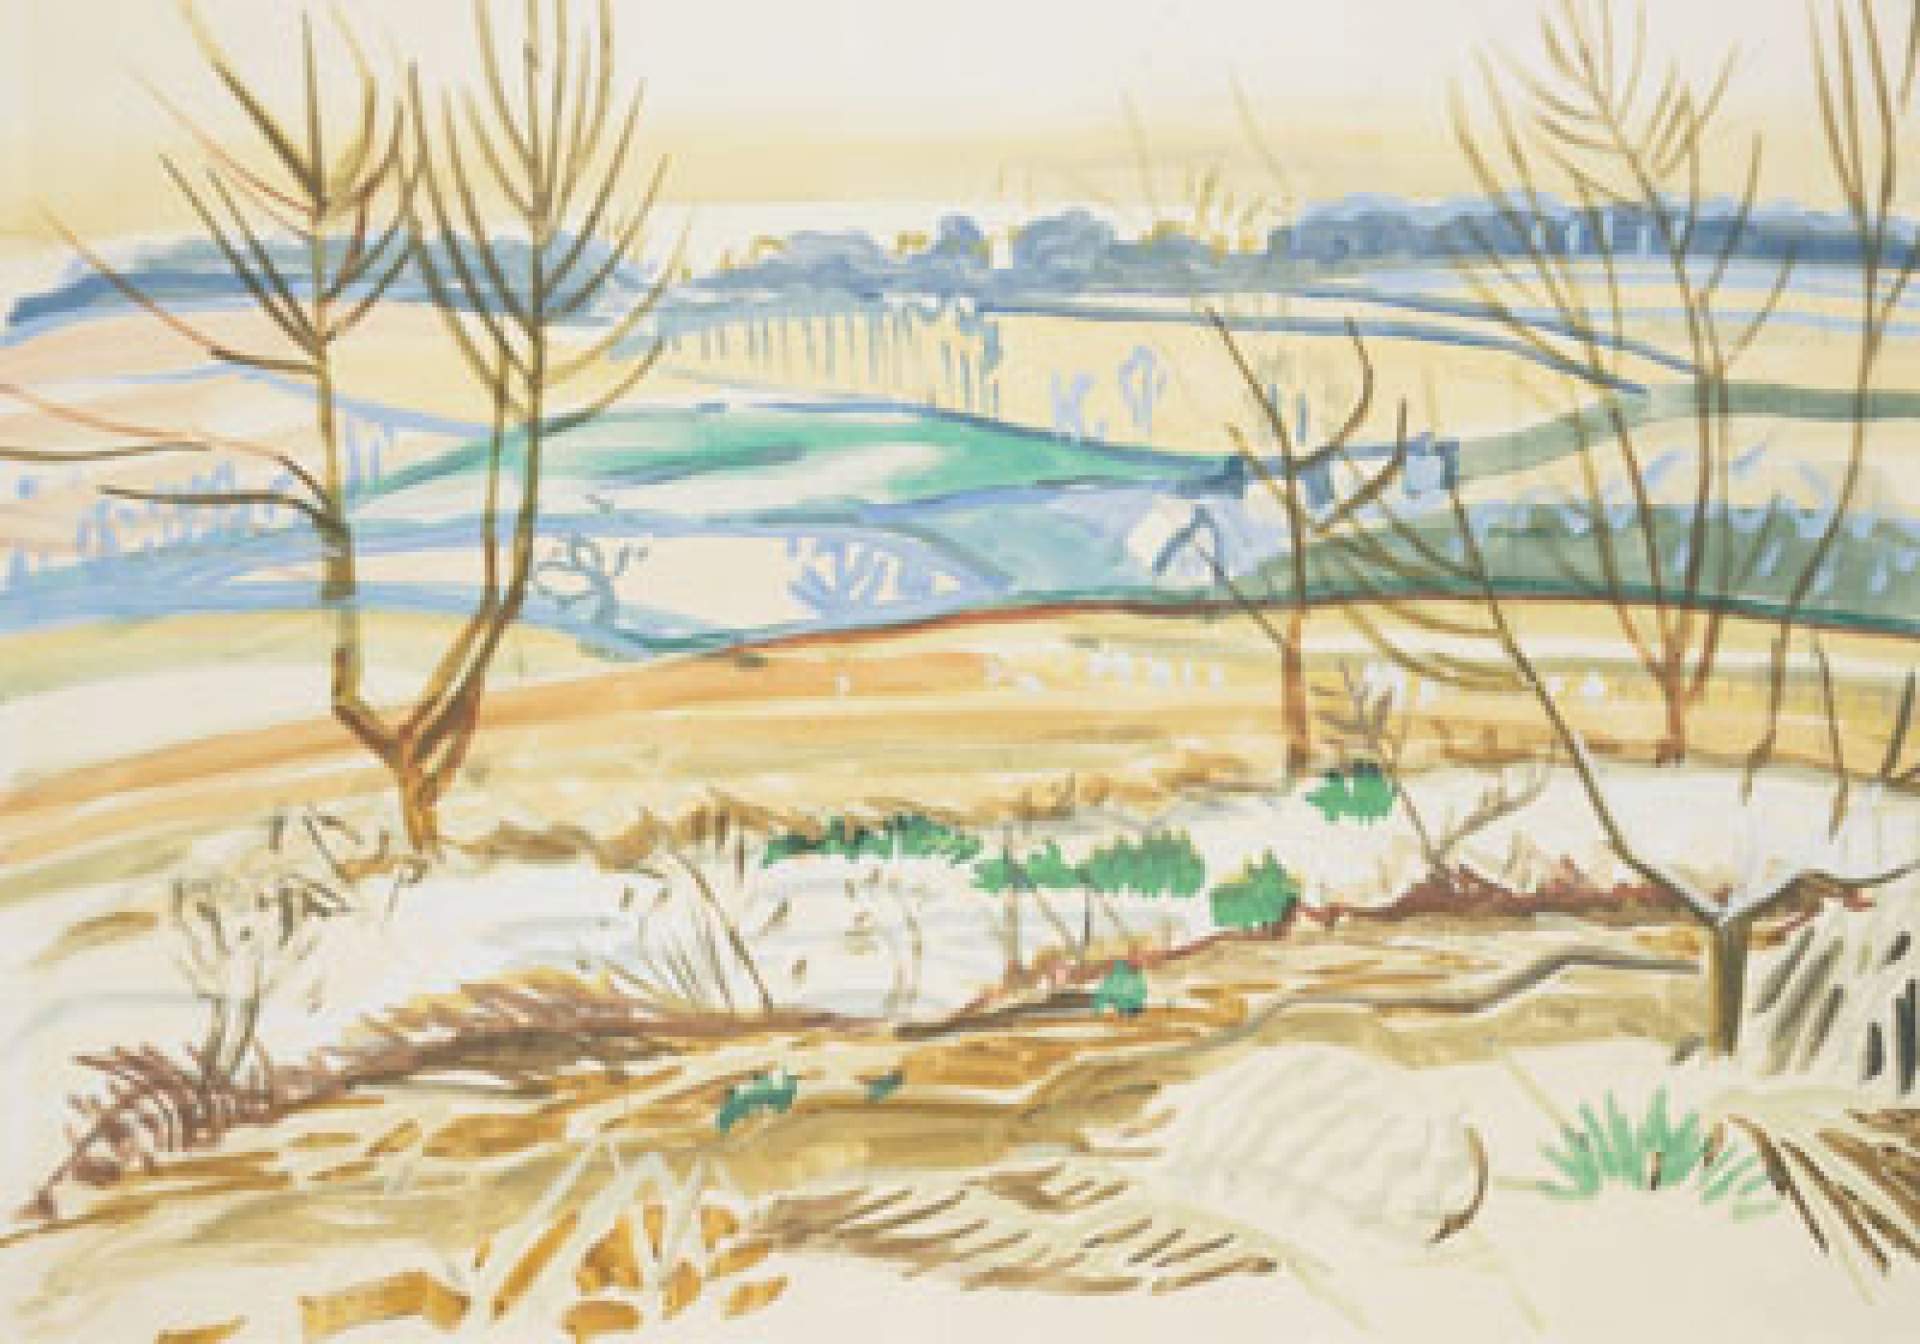 Untitled [Landscape with snow, dormant trees, and pond]